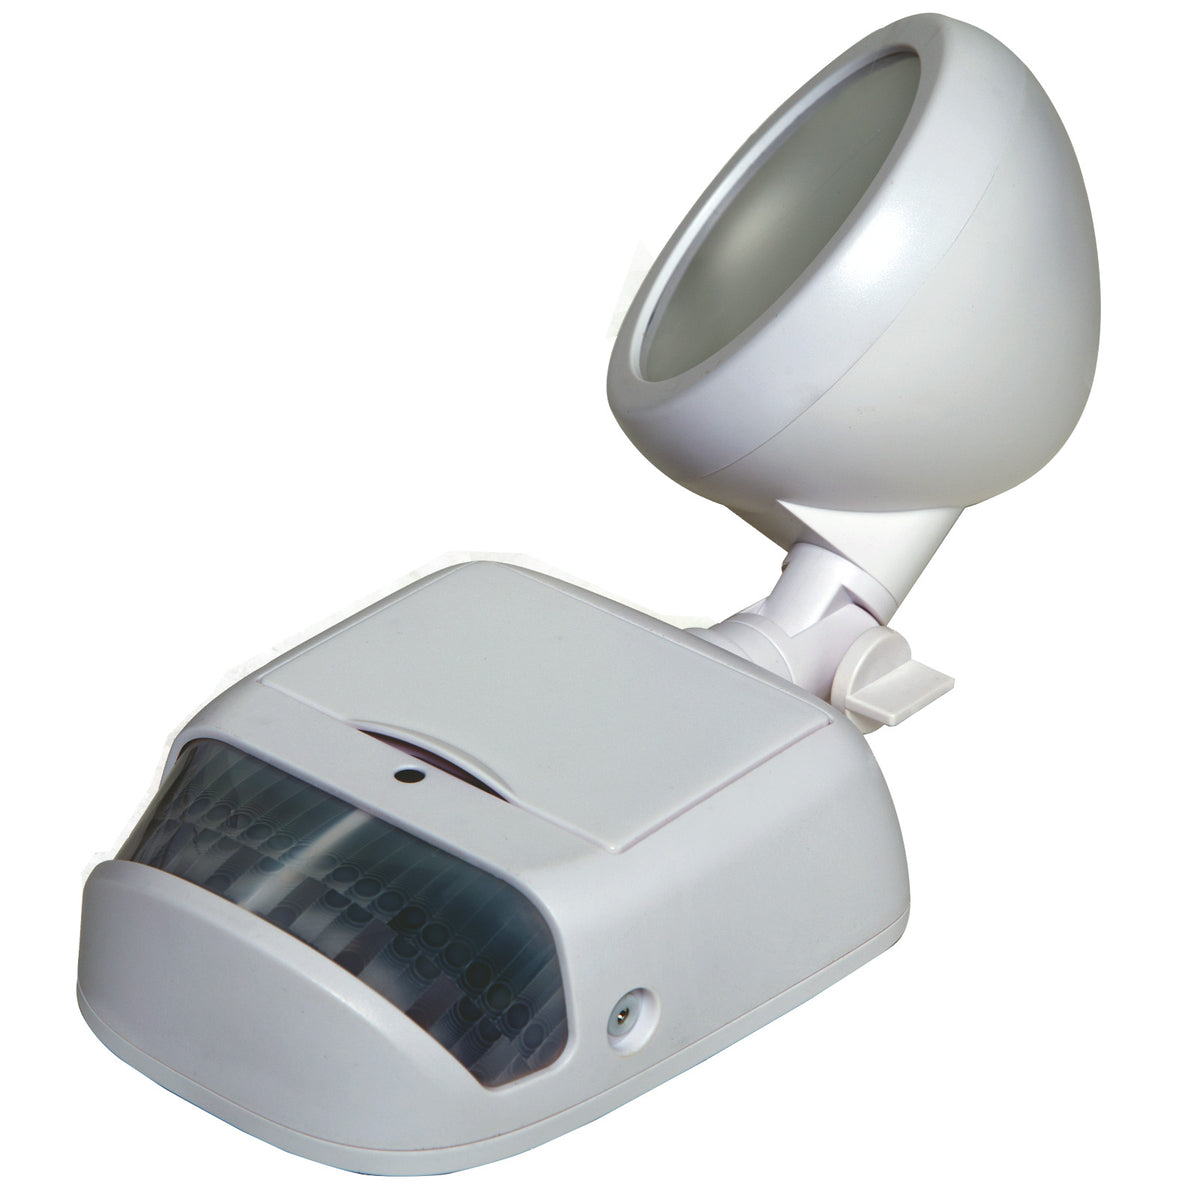 buy solar powered lights at cheap rate in bulk. wholesale & retail garden decorating supplies store.